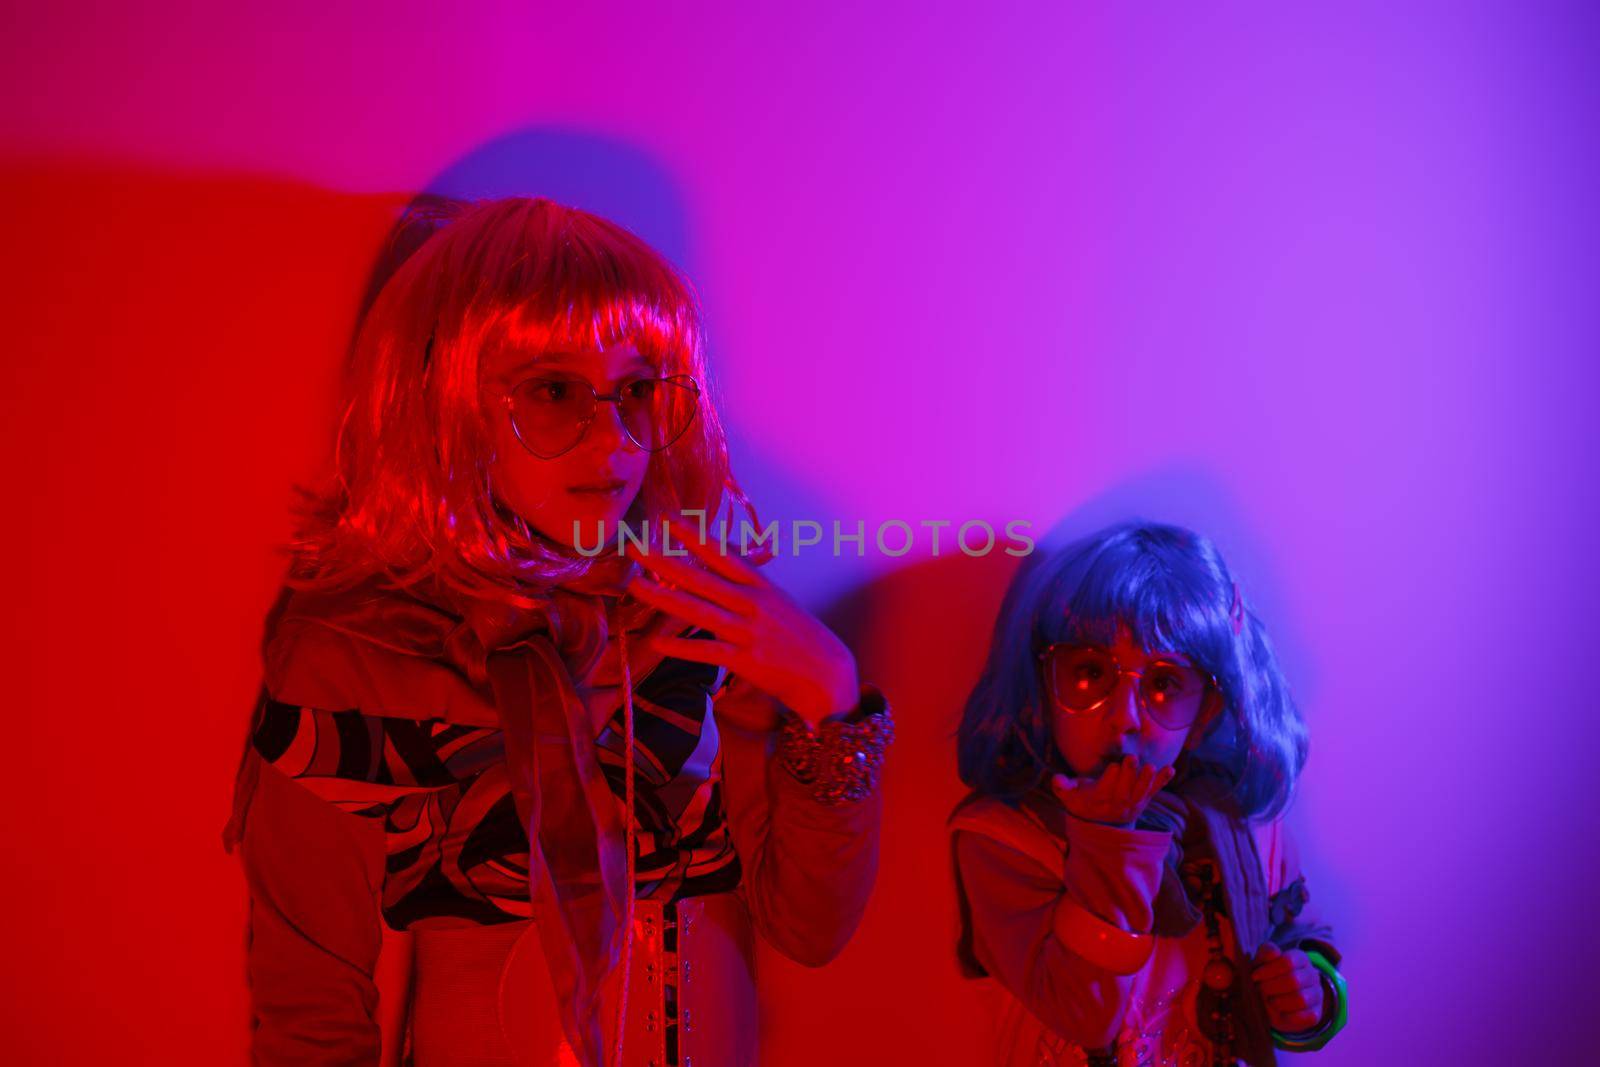 Two little girls wearing a colorful wig and heart-shaped sunglasses posed for a photo shooting on the disco light background